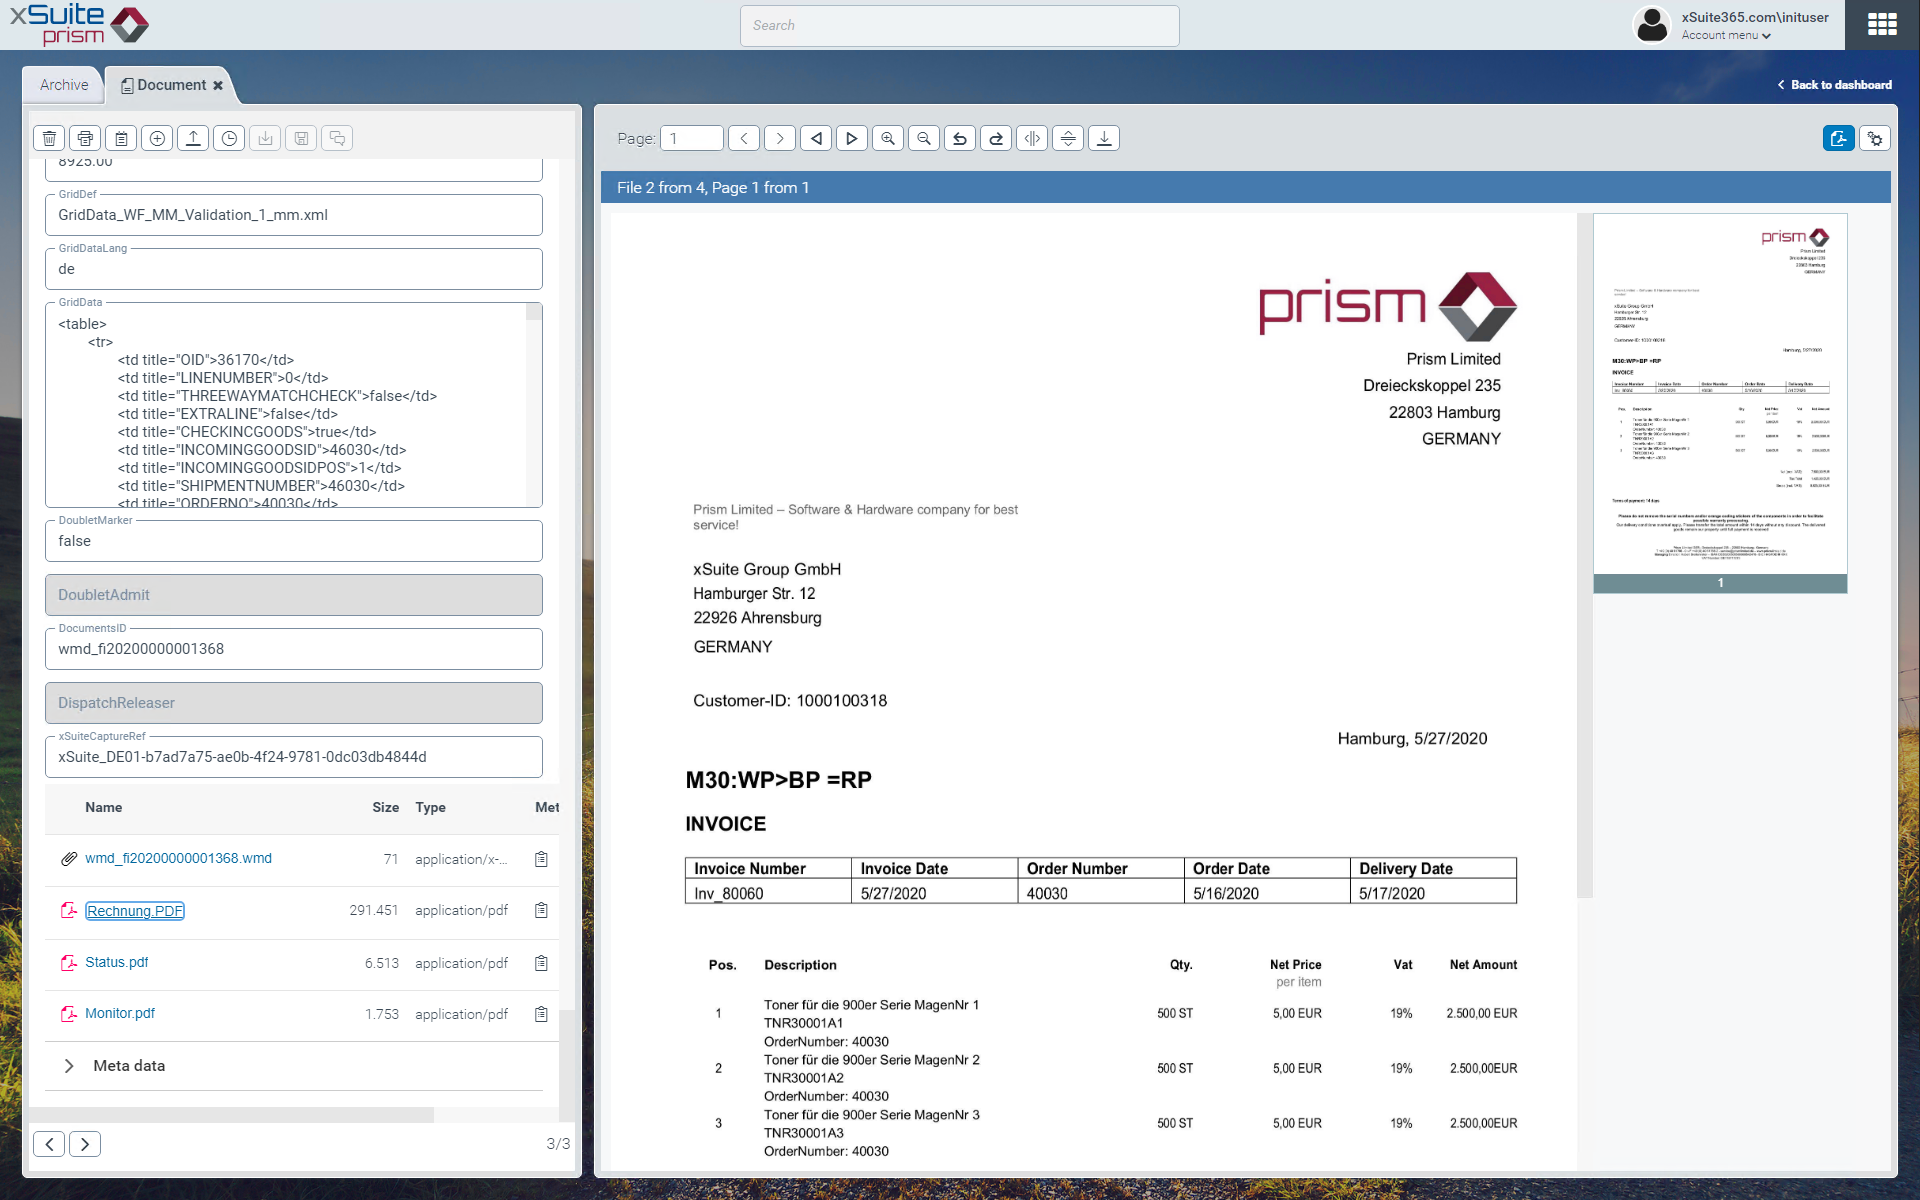 Archiving for ERP Systems > xSuite Archive Prism xSuite